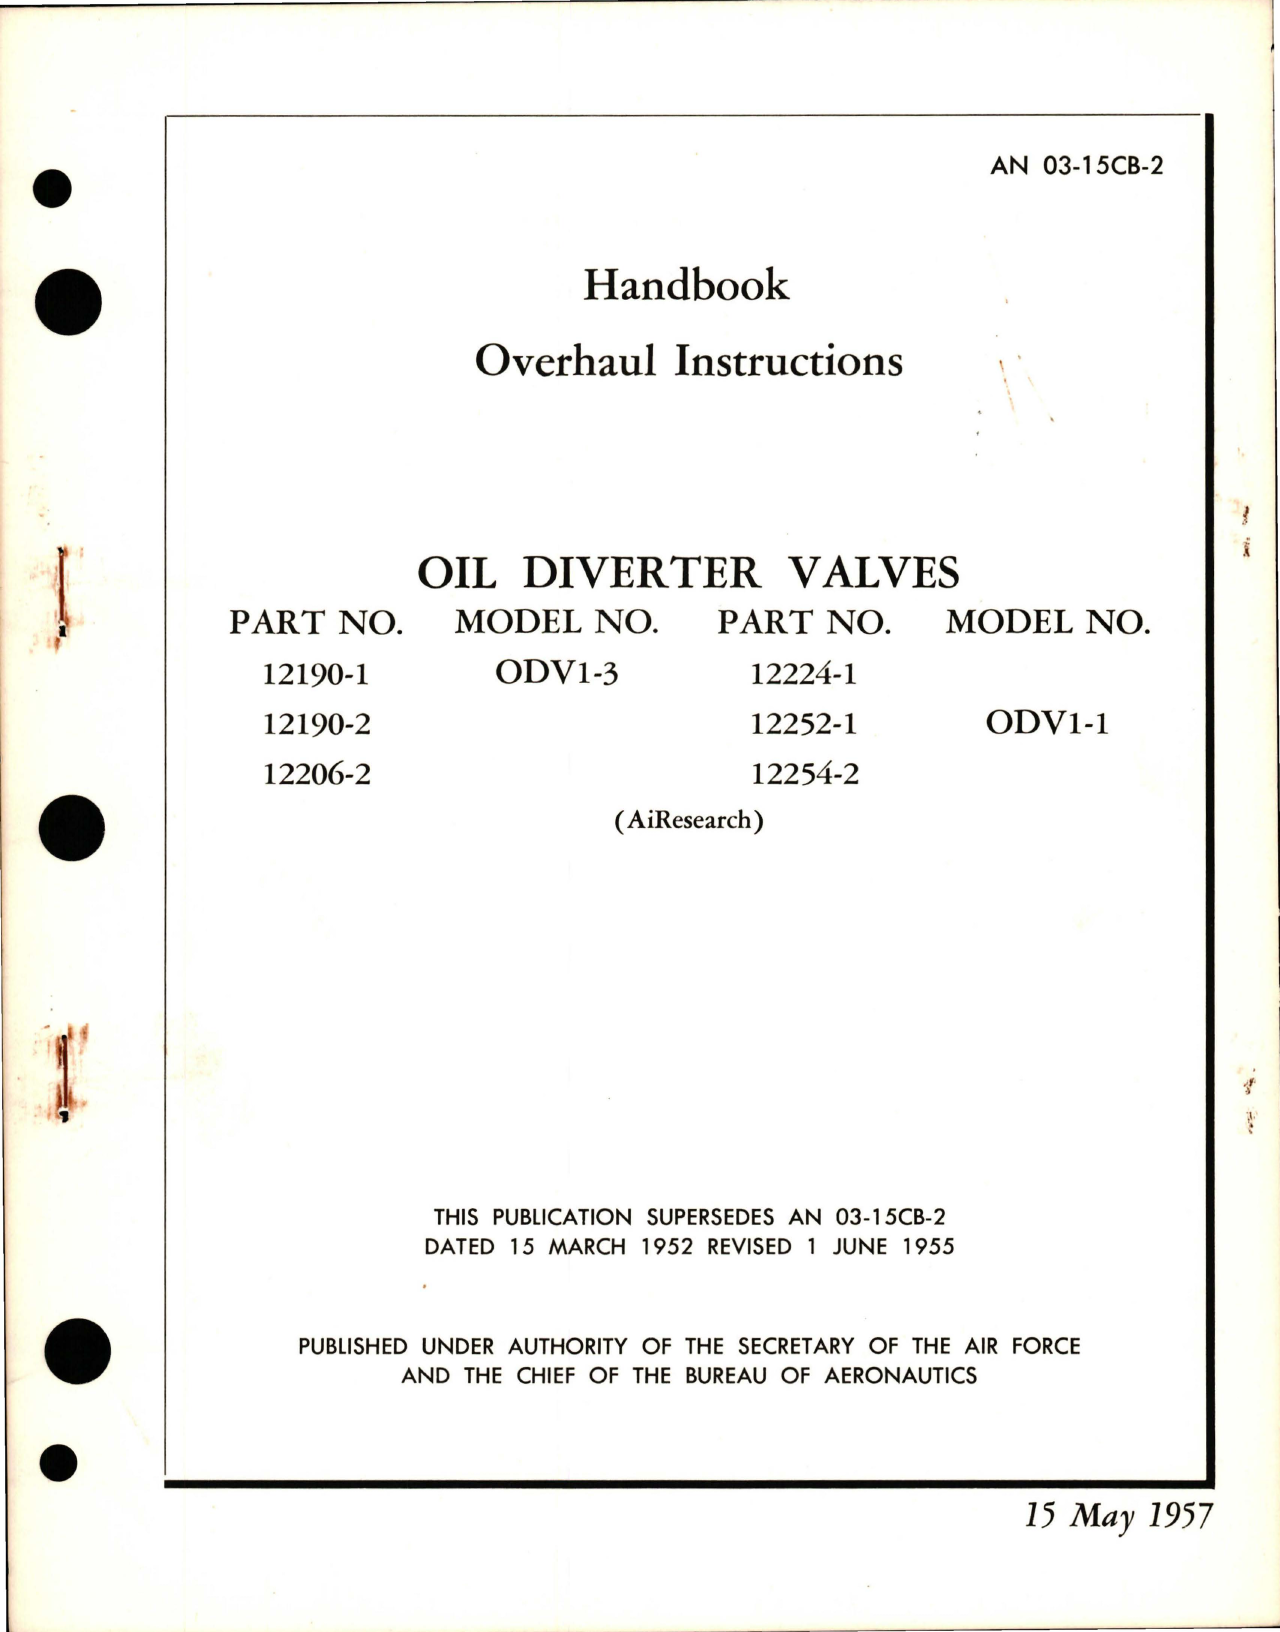 Sample page 1 from AirCorps Library document: Overhaul Instructions for Oil Diverter Valves